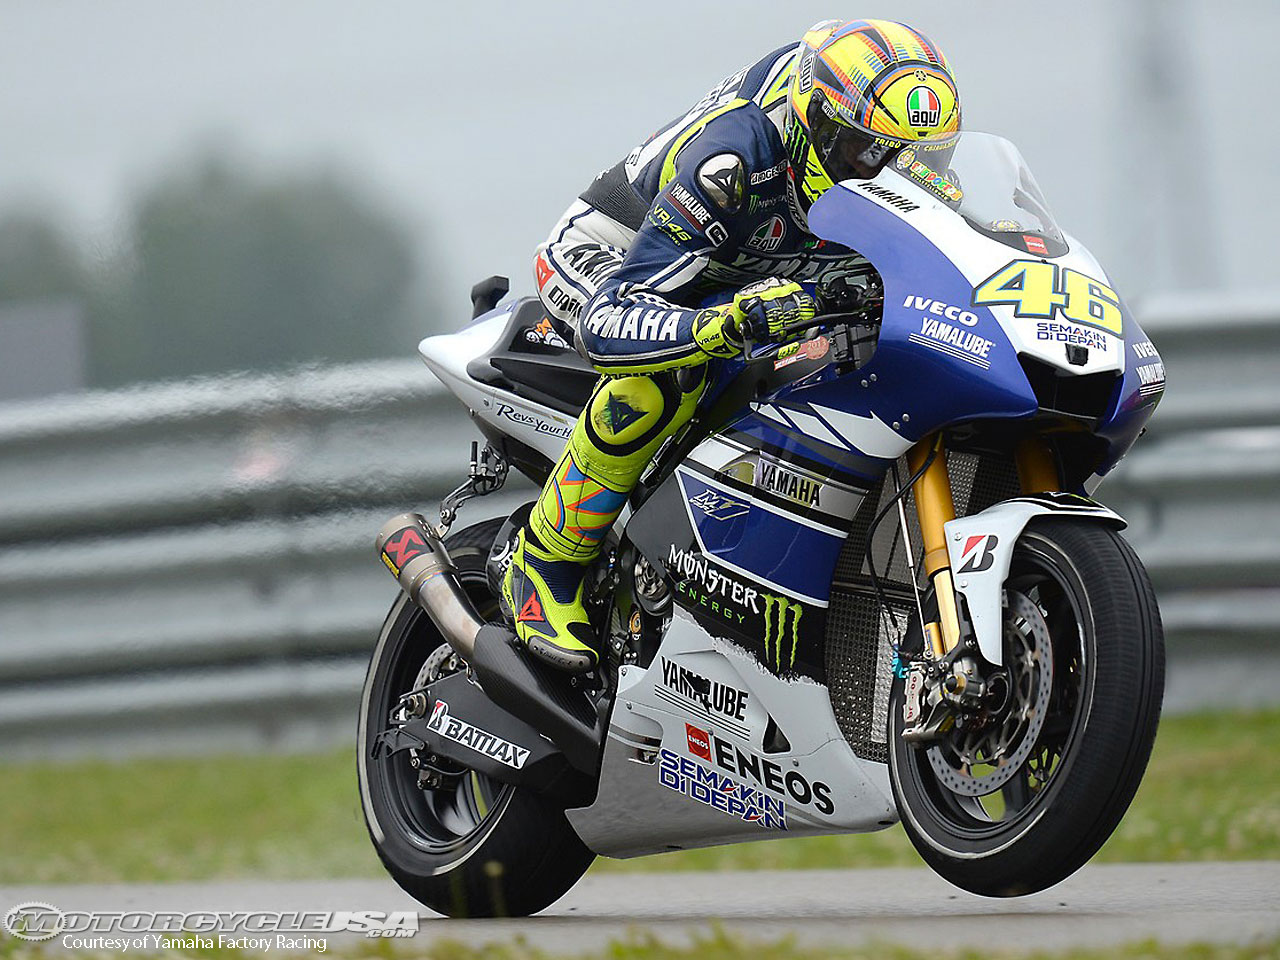   Valentino Rossi at the 2013 Assen MotoGP  image - motorcycle-usa.com 